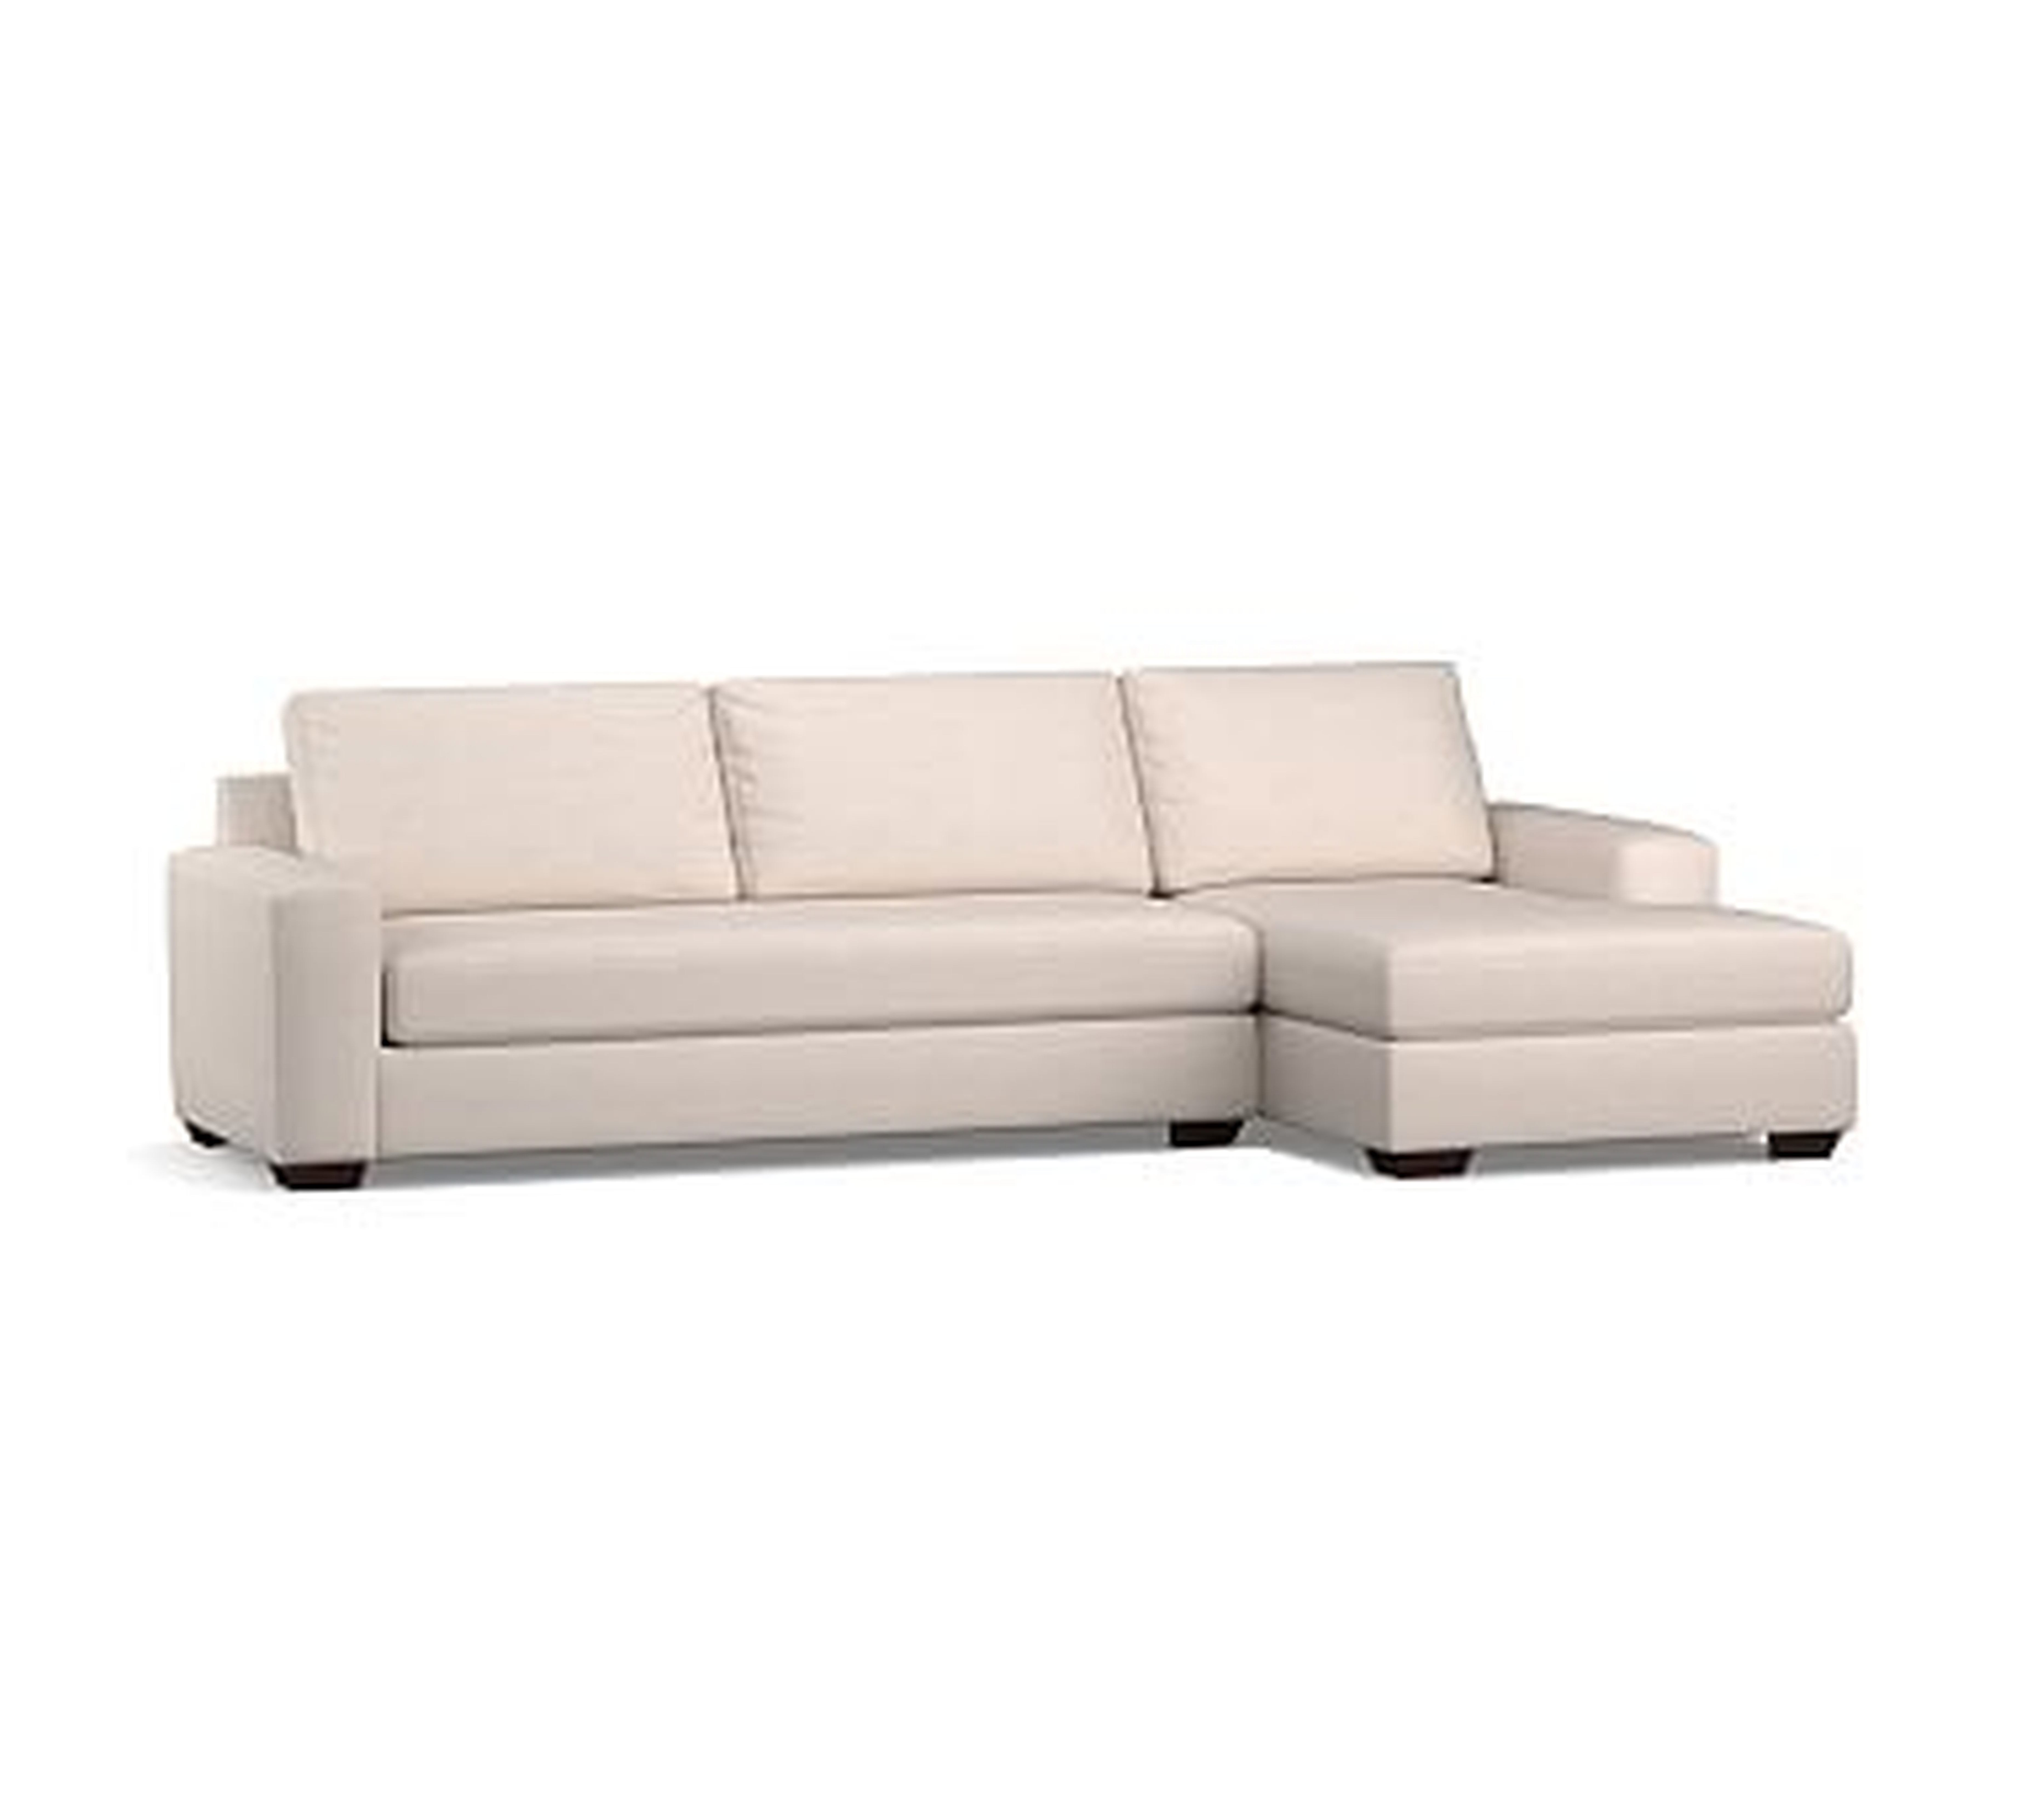 Big Sur Square Arm Upholstered Left Arm Sofa with Chaise Sectional and Bench Cushion, Down Blend Wrapped Cushions, Performance Brushed Basketweave Ivory - Pottery Barn